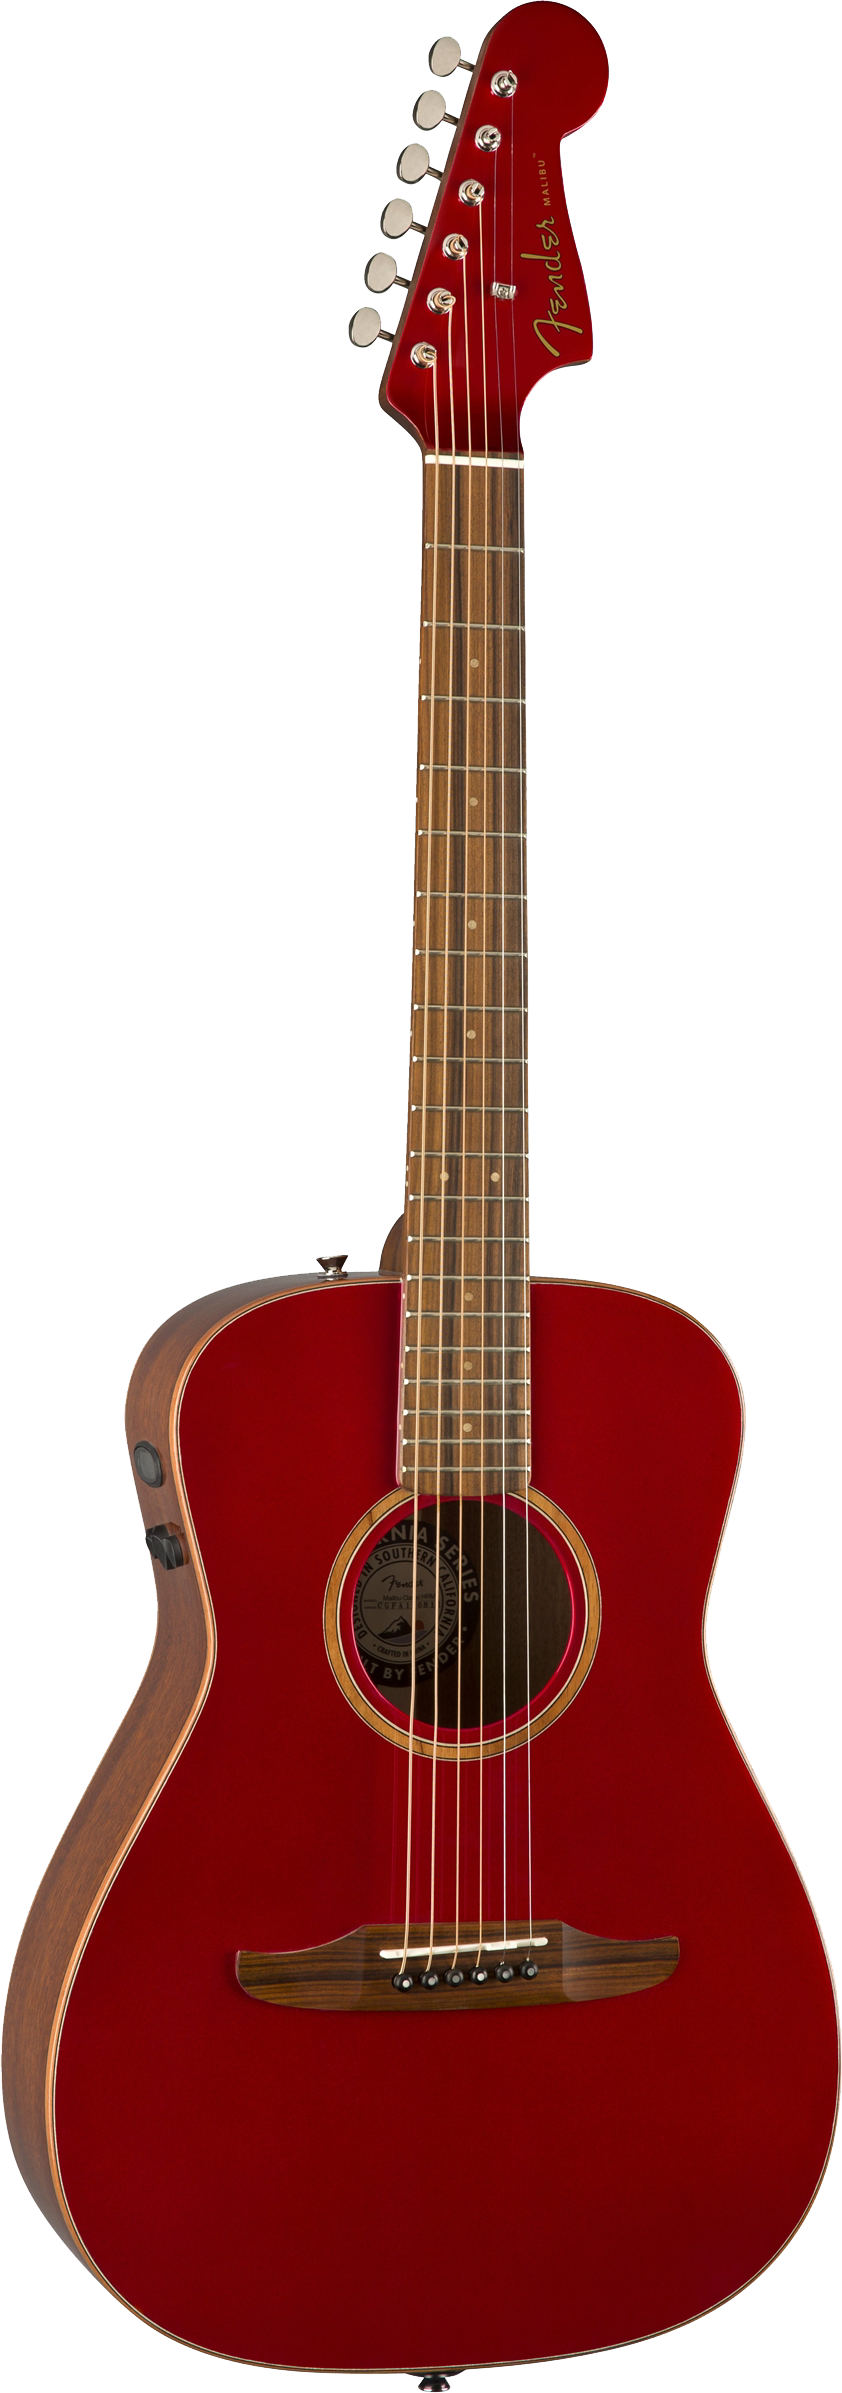 Fender Redondo Acoustic / Electric Guitar - Candy Apple Red - Grass Roots Store